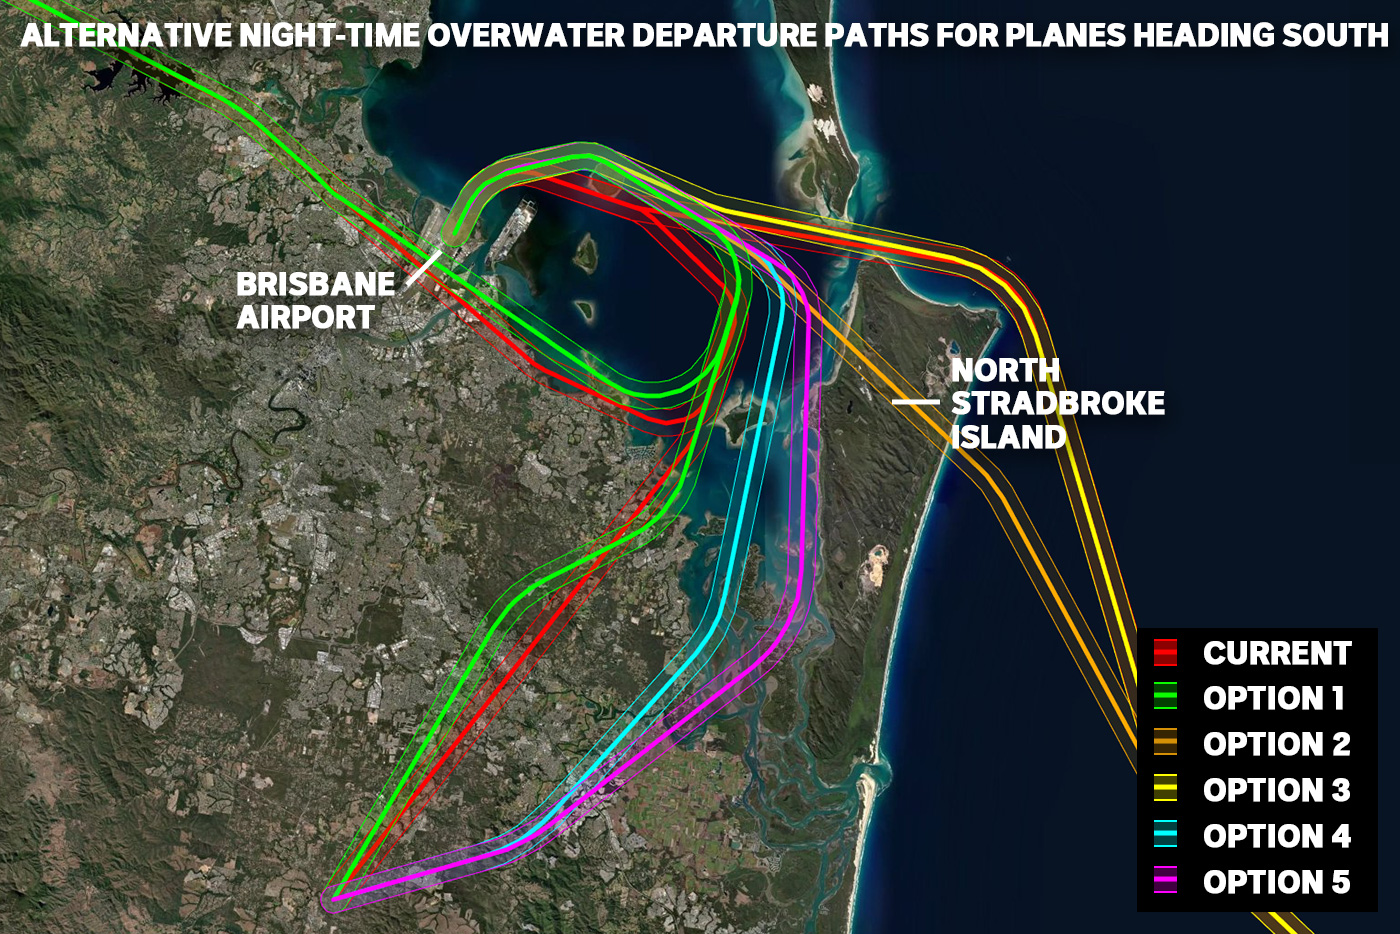 Alternative night-time overwater departure paths for planes heading south